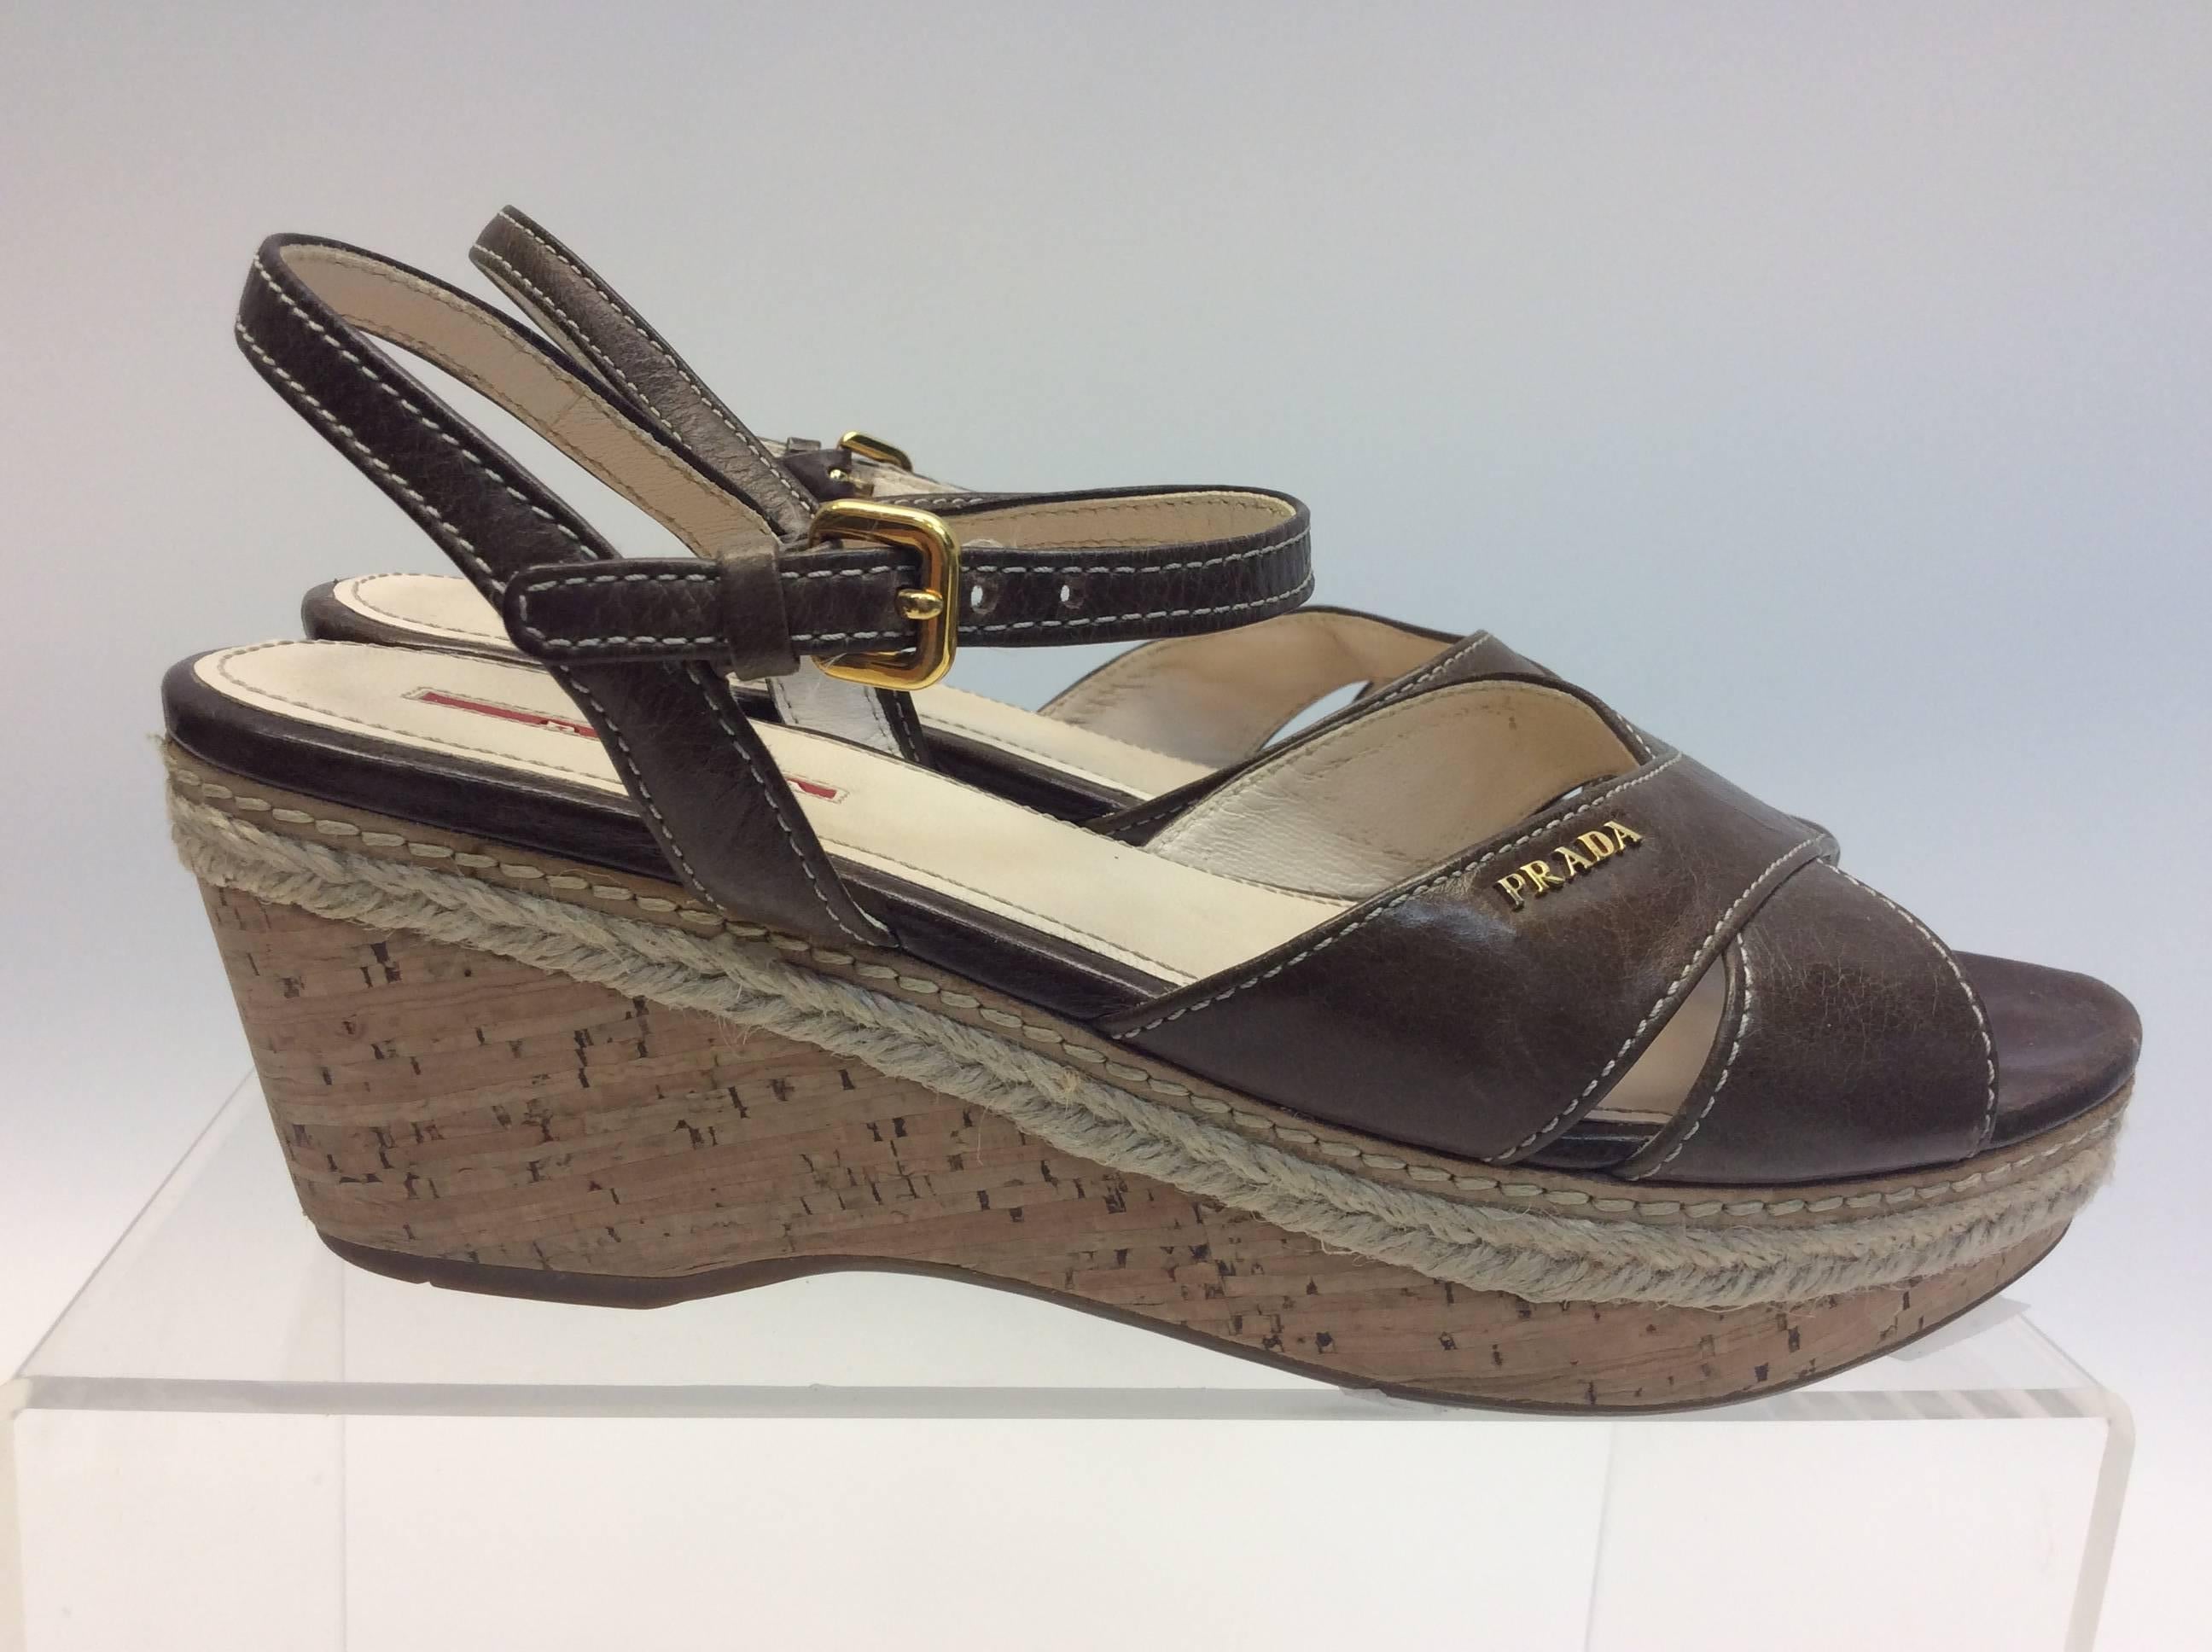 Prada Brown Leather Wedge Sandal In Excellent Condition For Sale In Narberth, PA